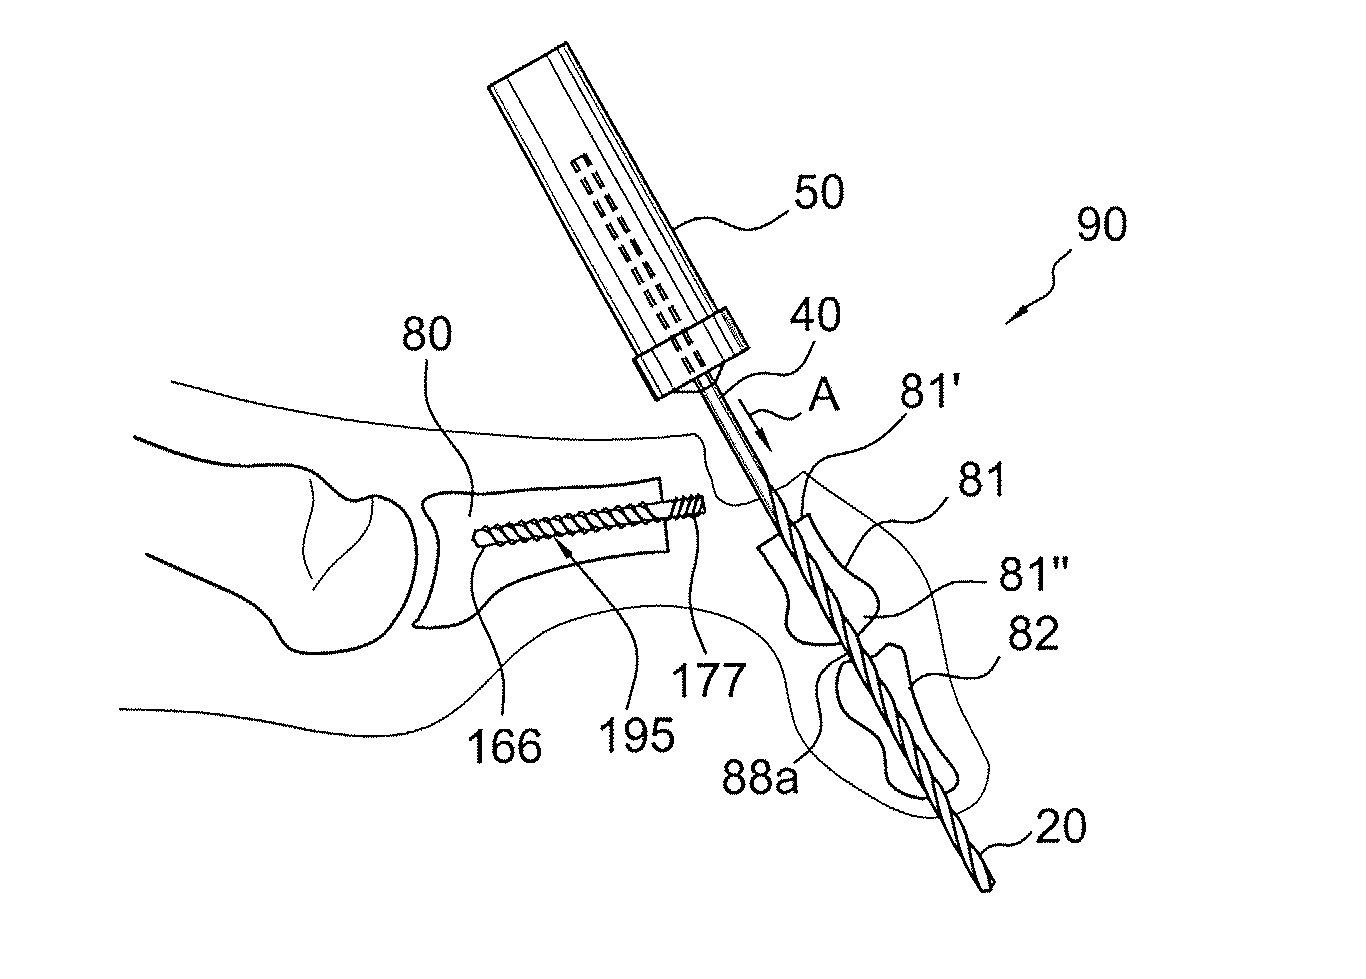 Drill/driver hybrid instrument for interphalangeal fusion